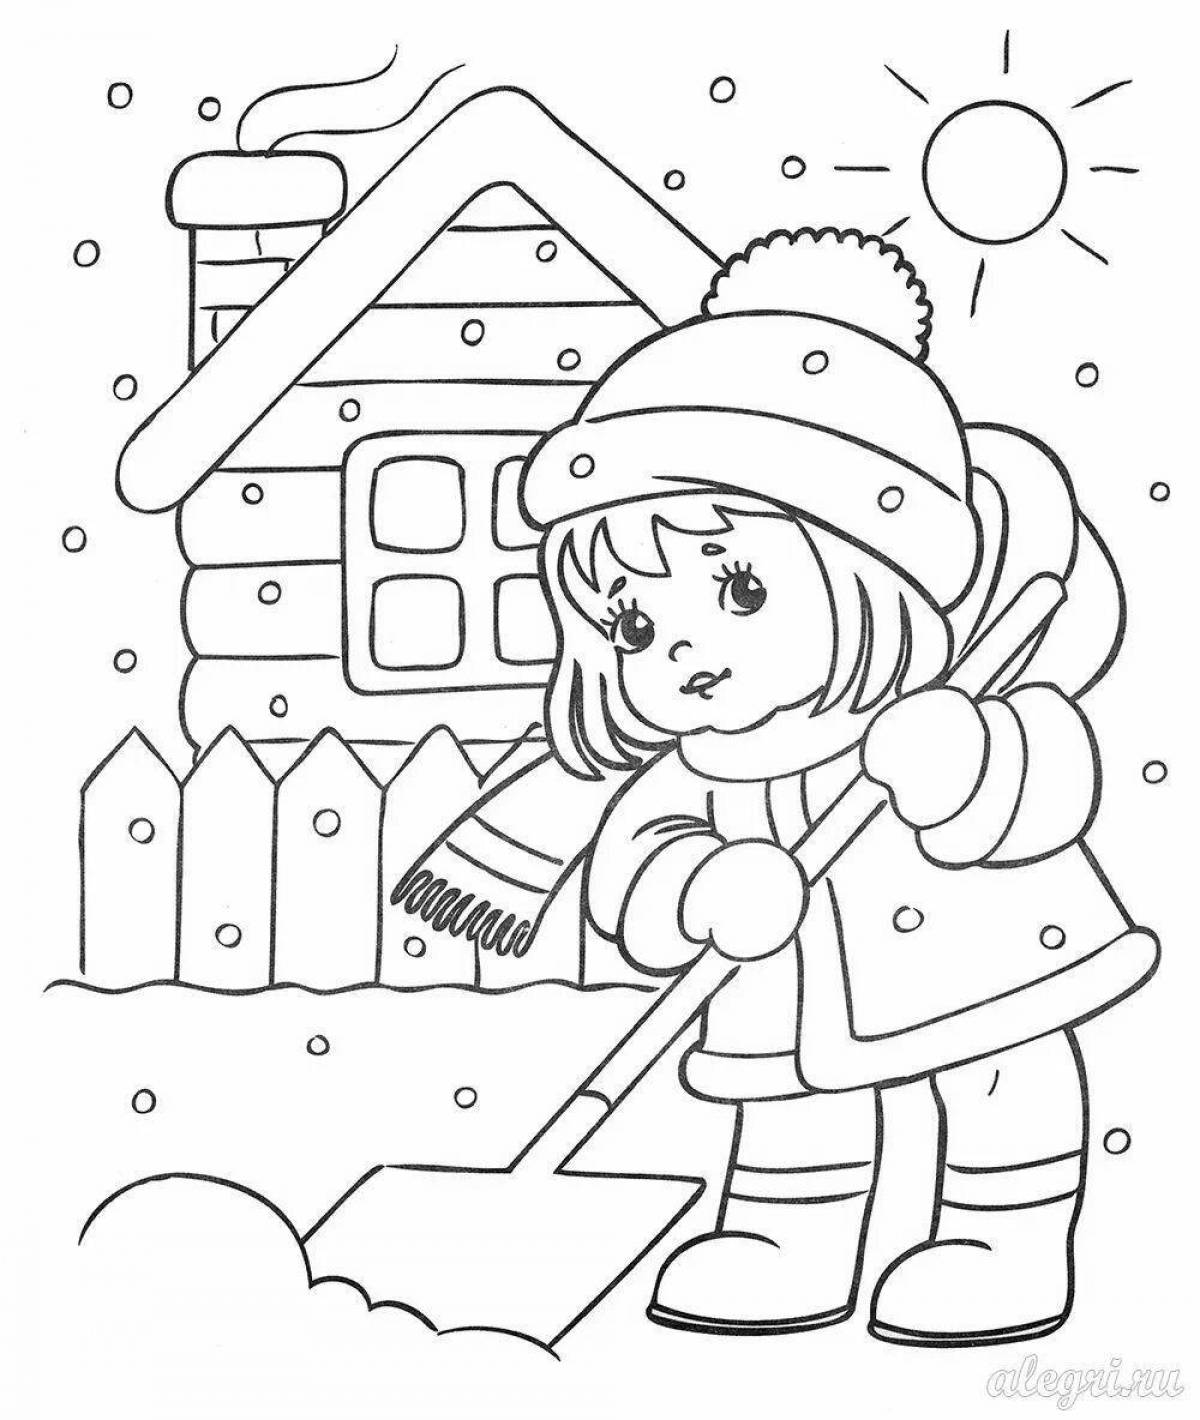 Delightful coloring page 3 4 years of winter